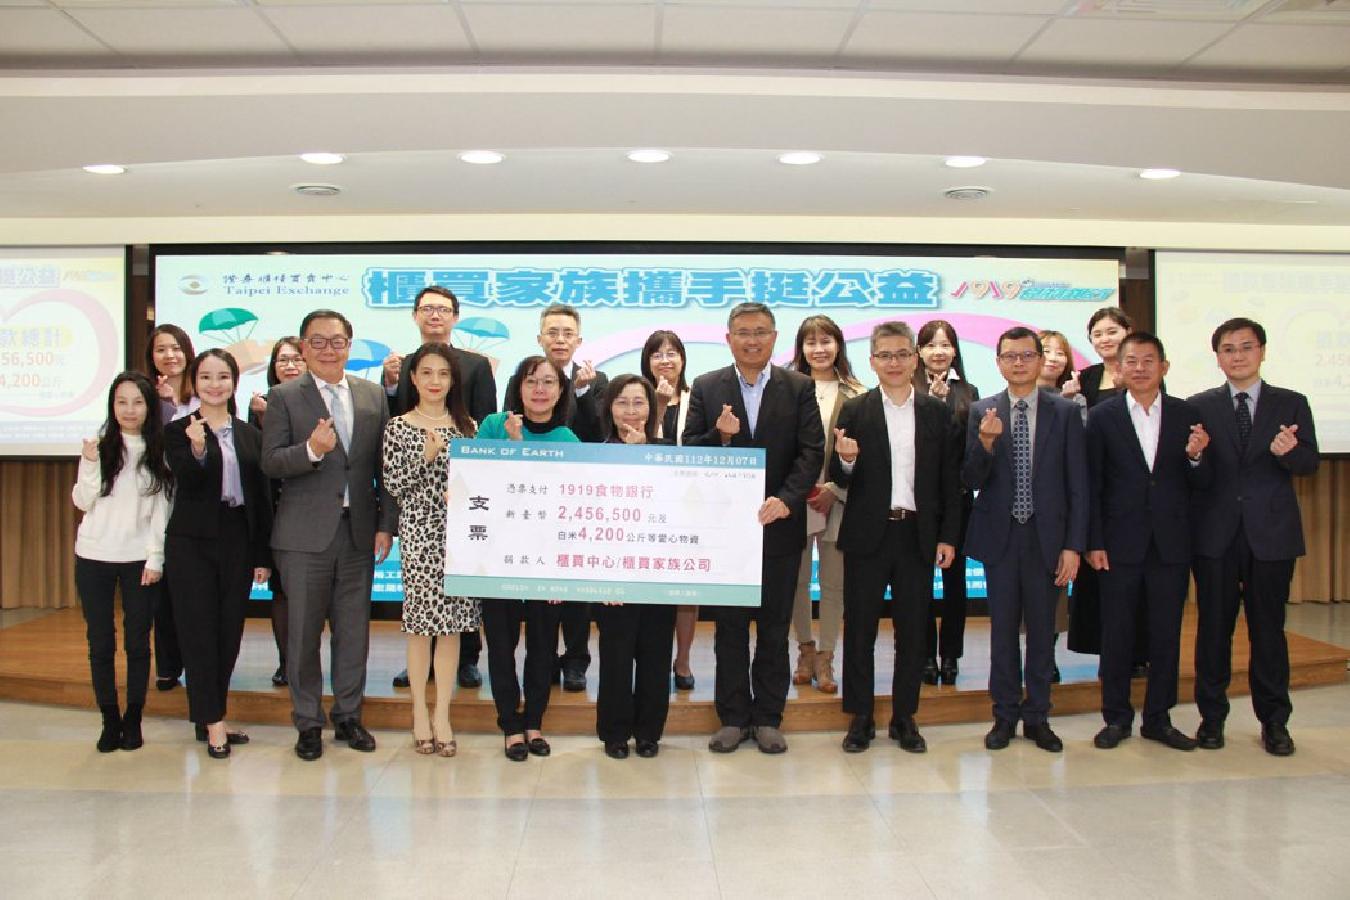 Taipei Exchange (TPEx) calls on main board companies and emerging stock board (ESB) companies to support public interest activities. This time, the joint effort raised more than NT$2.46million, 4,200 kgs of rice and other supplies, which were donated to the 1919 Food Bank to help economically disadvantaged people and families in distress.